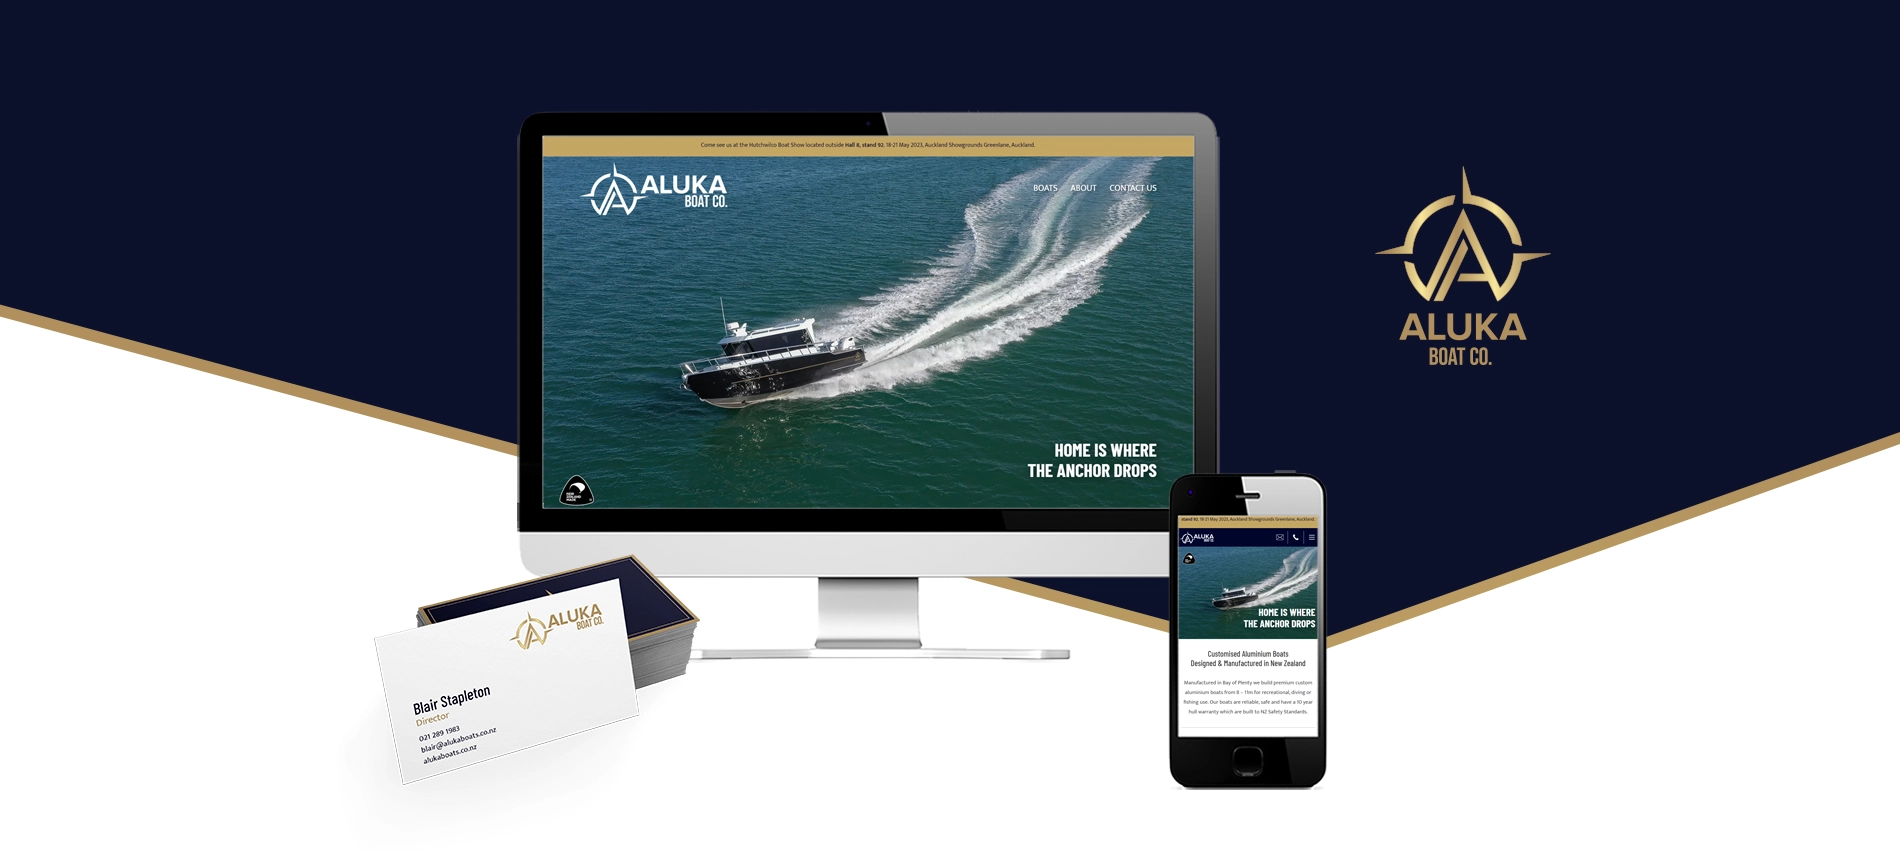 Aluka Boat Co. website design and business card banner - Aluka Boat Co.